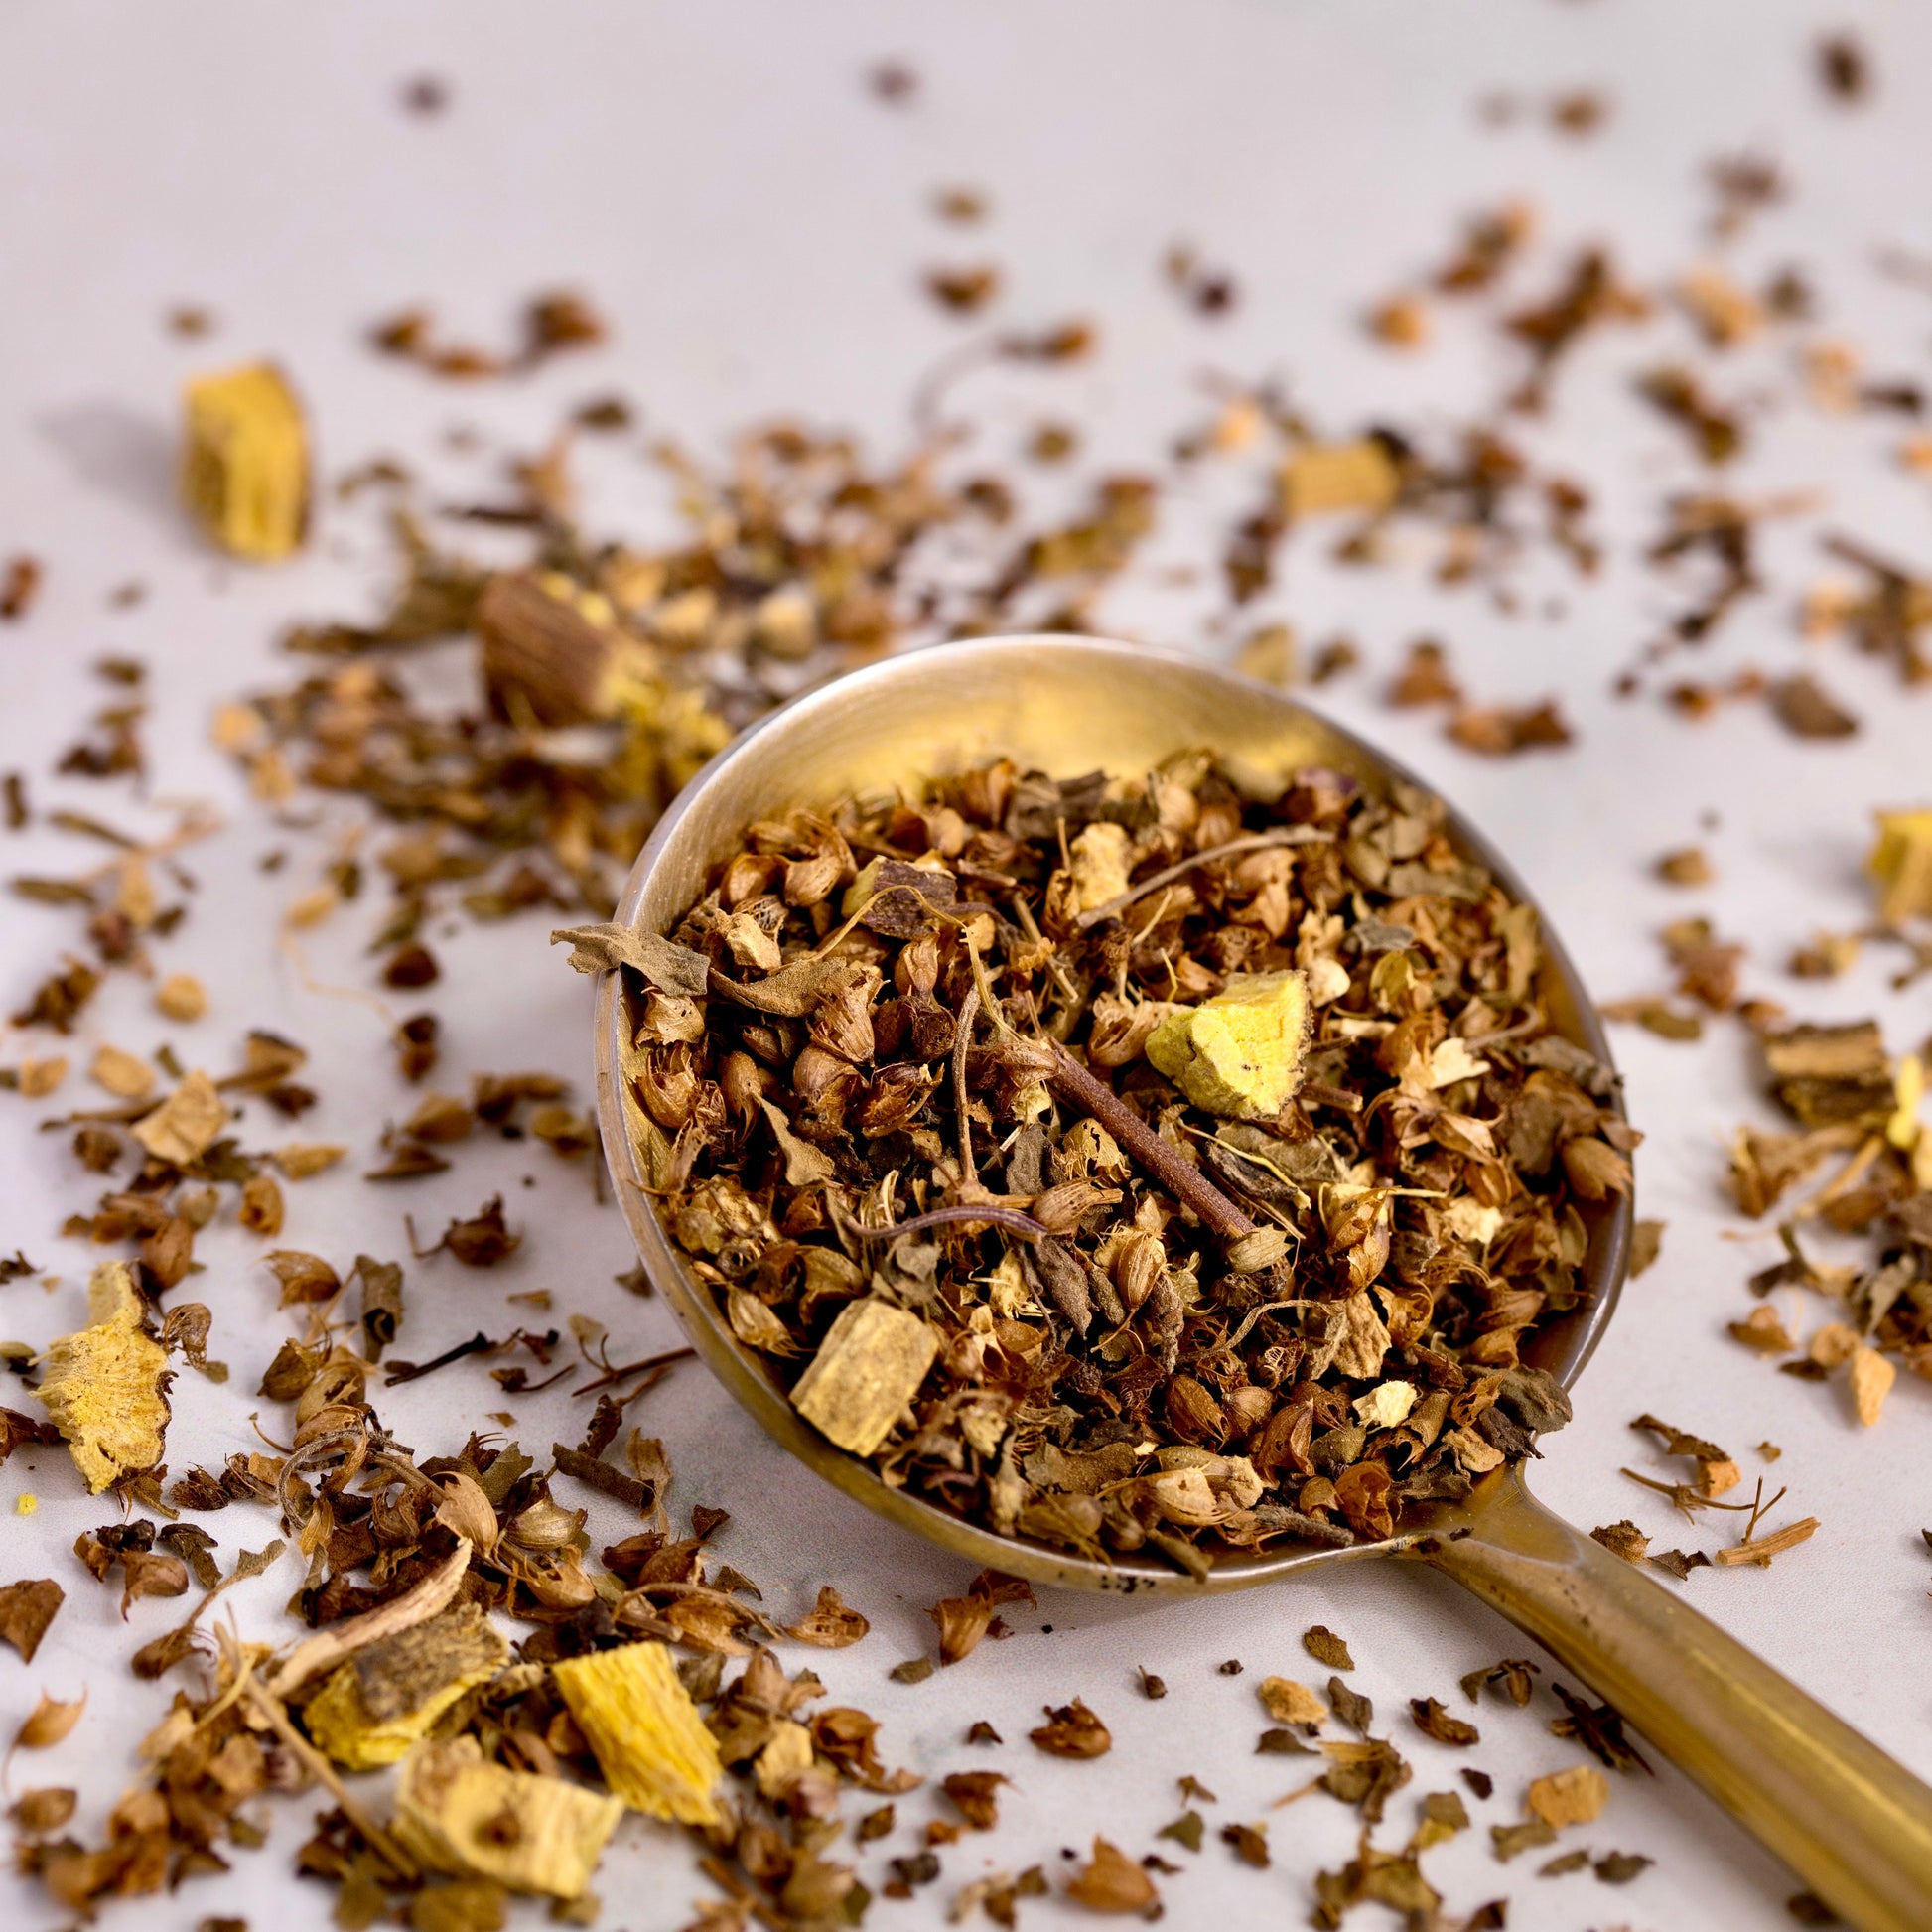 On a white background, there is a gold spoon. In and around the spoon is loose leaf ayurveda tulsi tea blend for cold and cough. The tea blend consists of organic tulsi, organic ginger and organic licorice root. The herbal tea is green and brown in color.